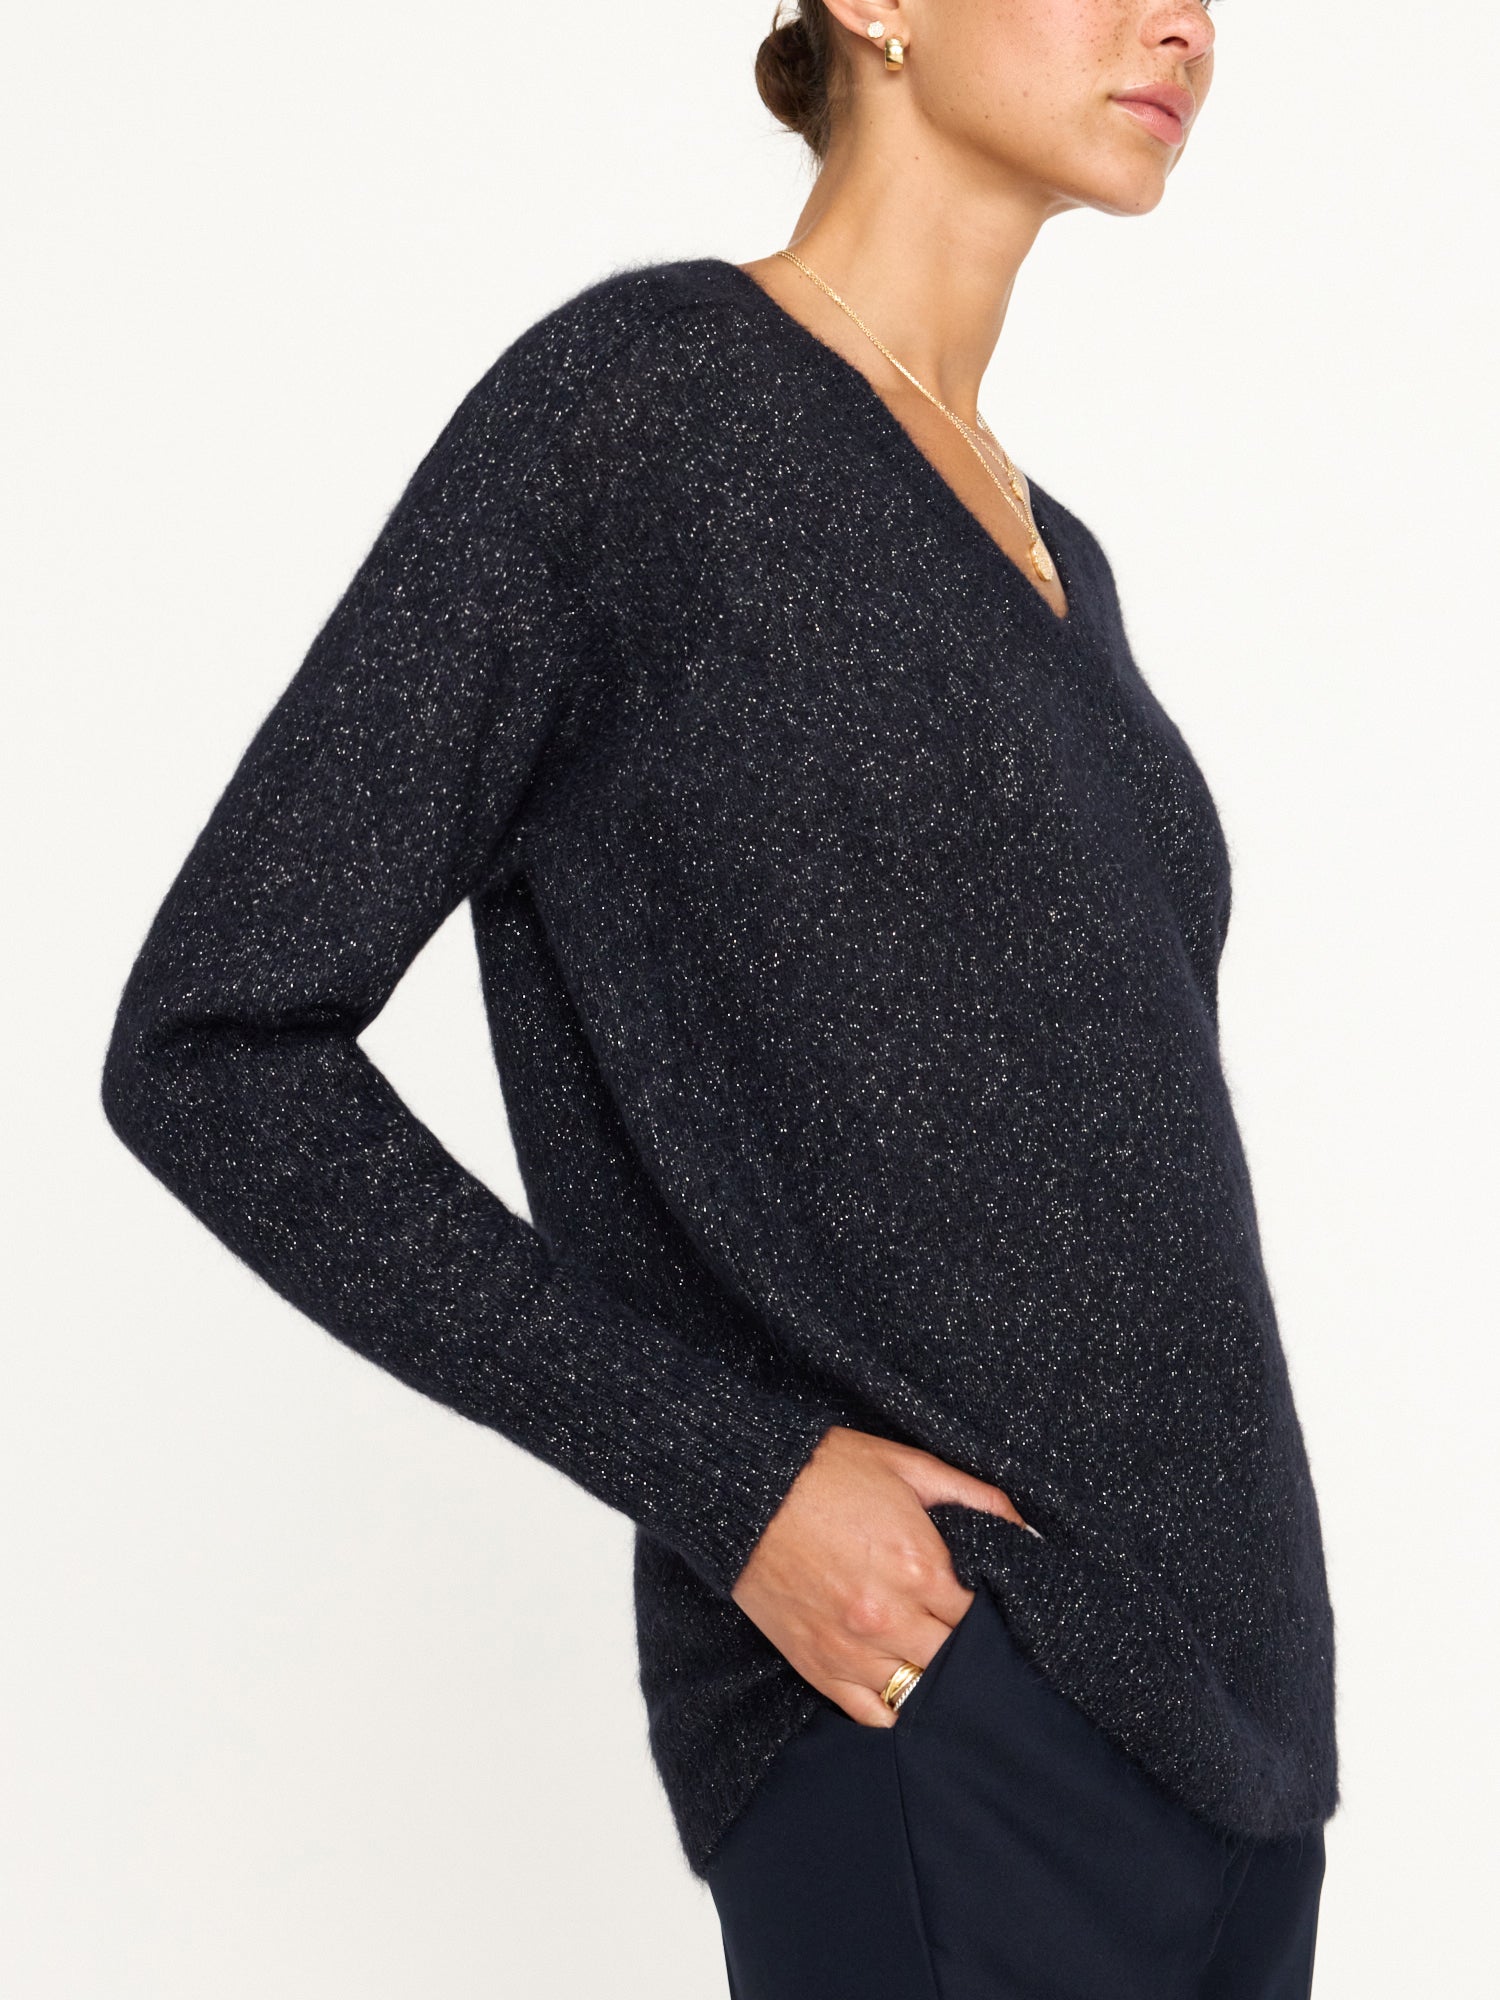 Allery v neck metallic navy sweater side view